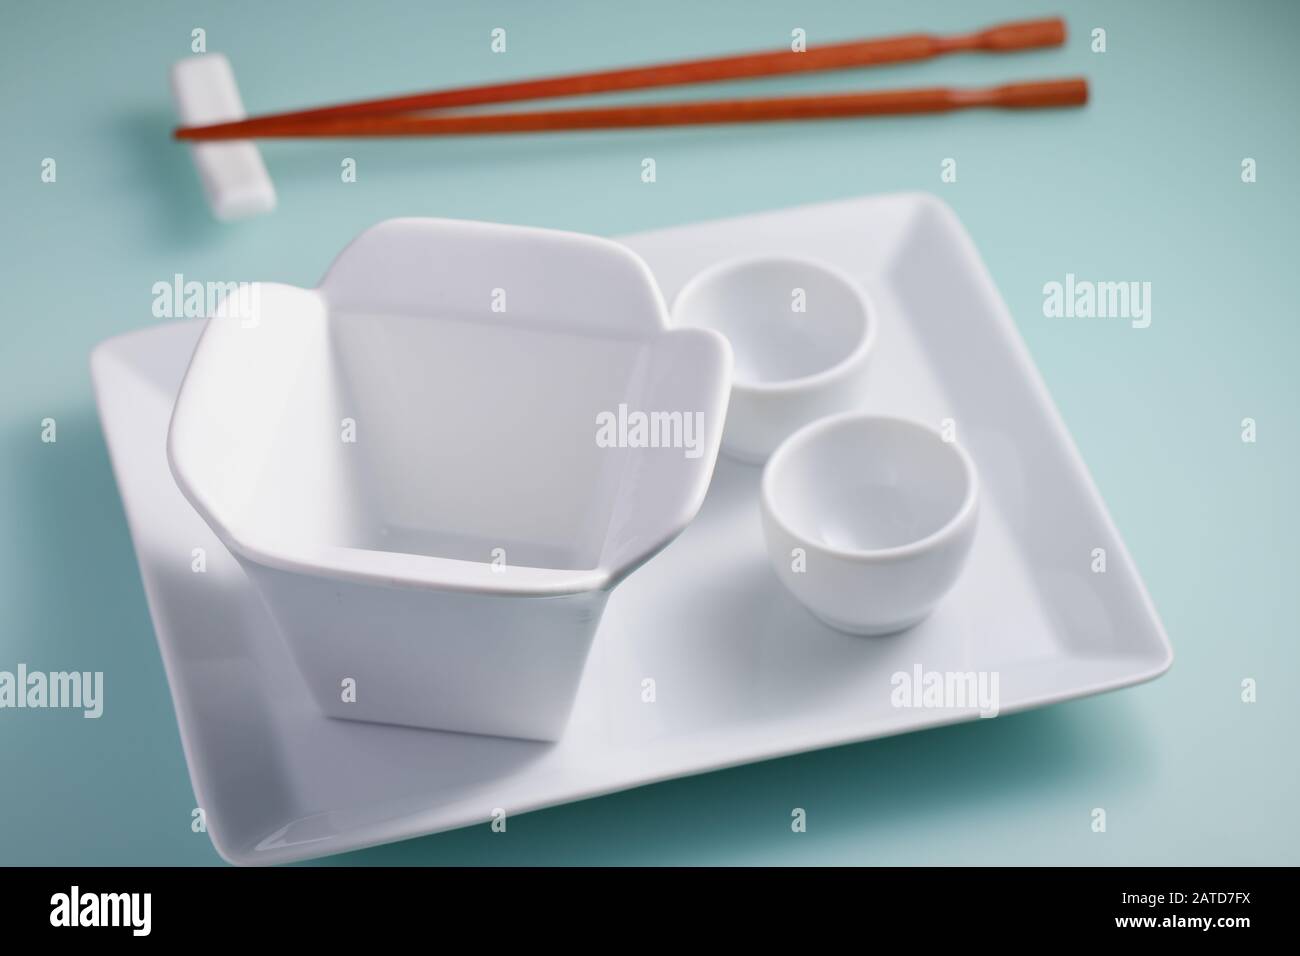 Asian table setting on blue background Stock Photo